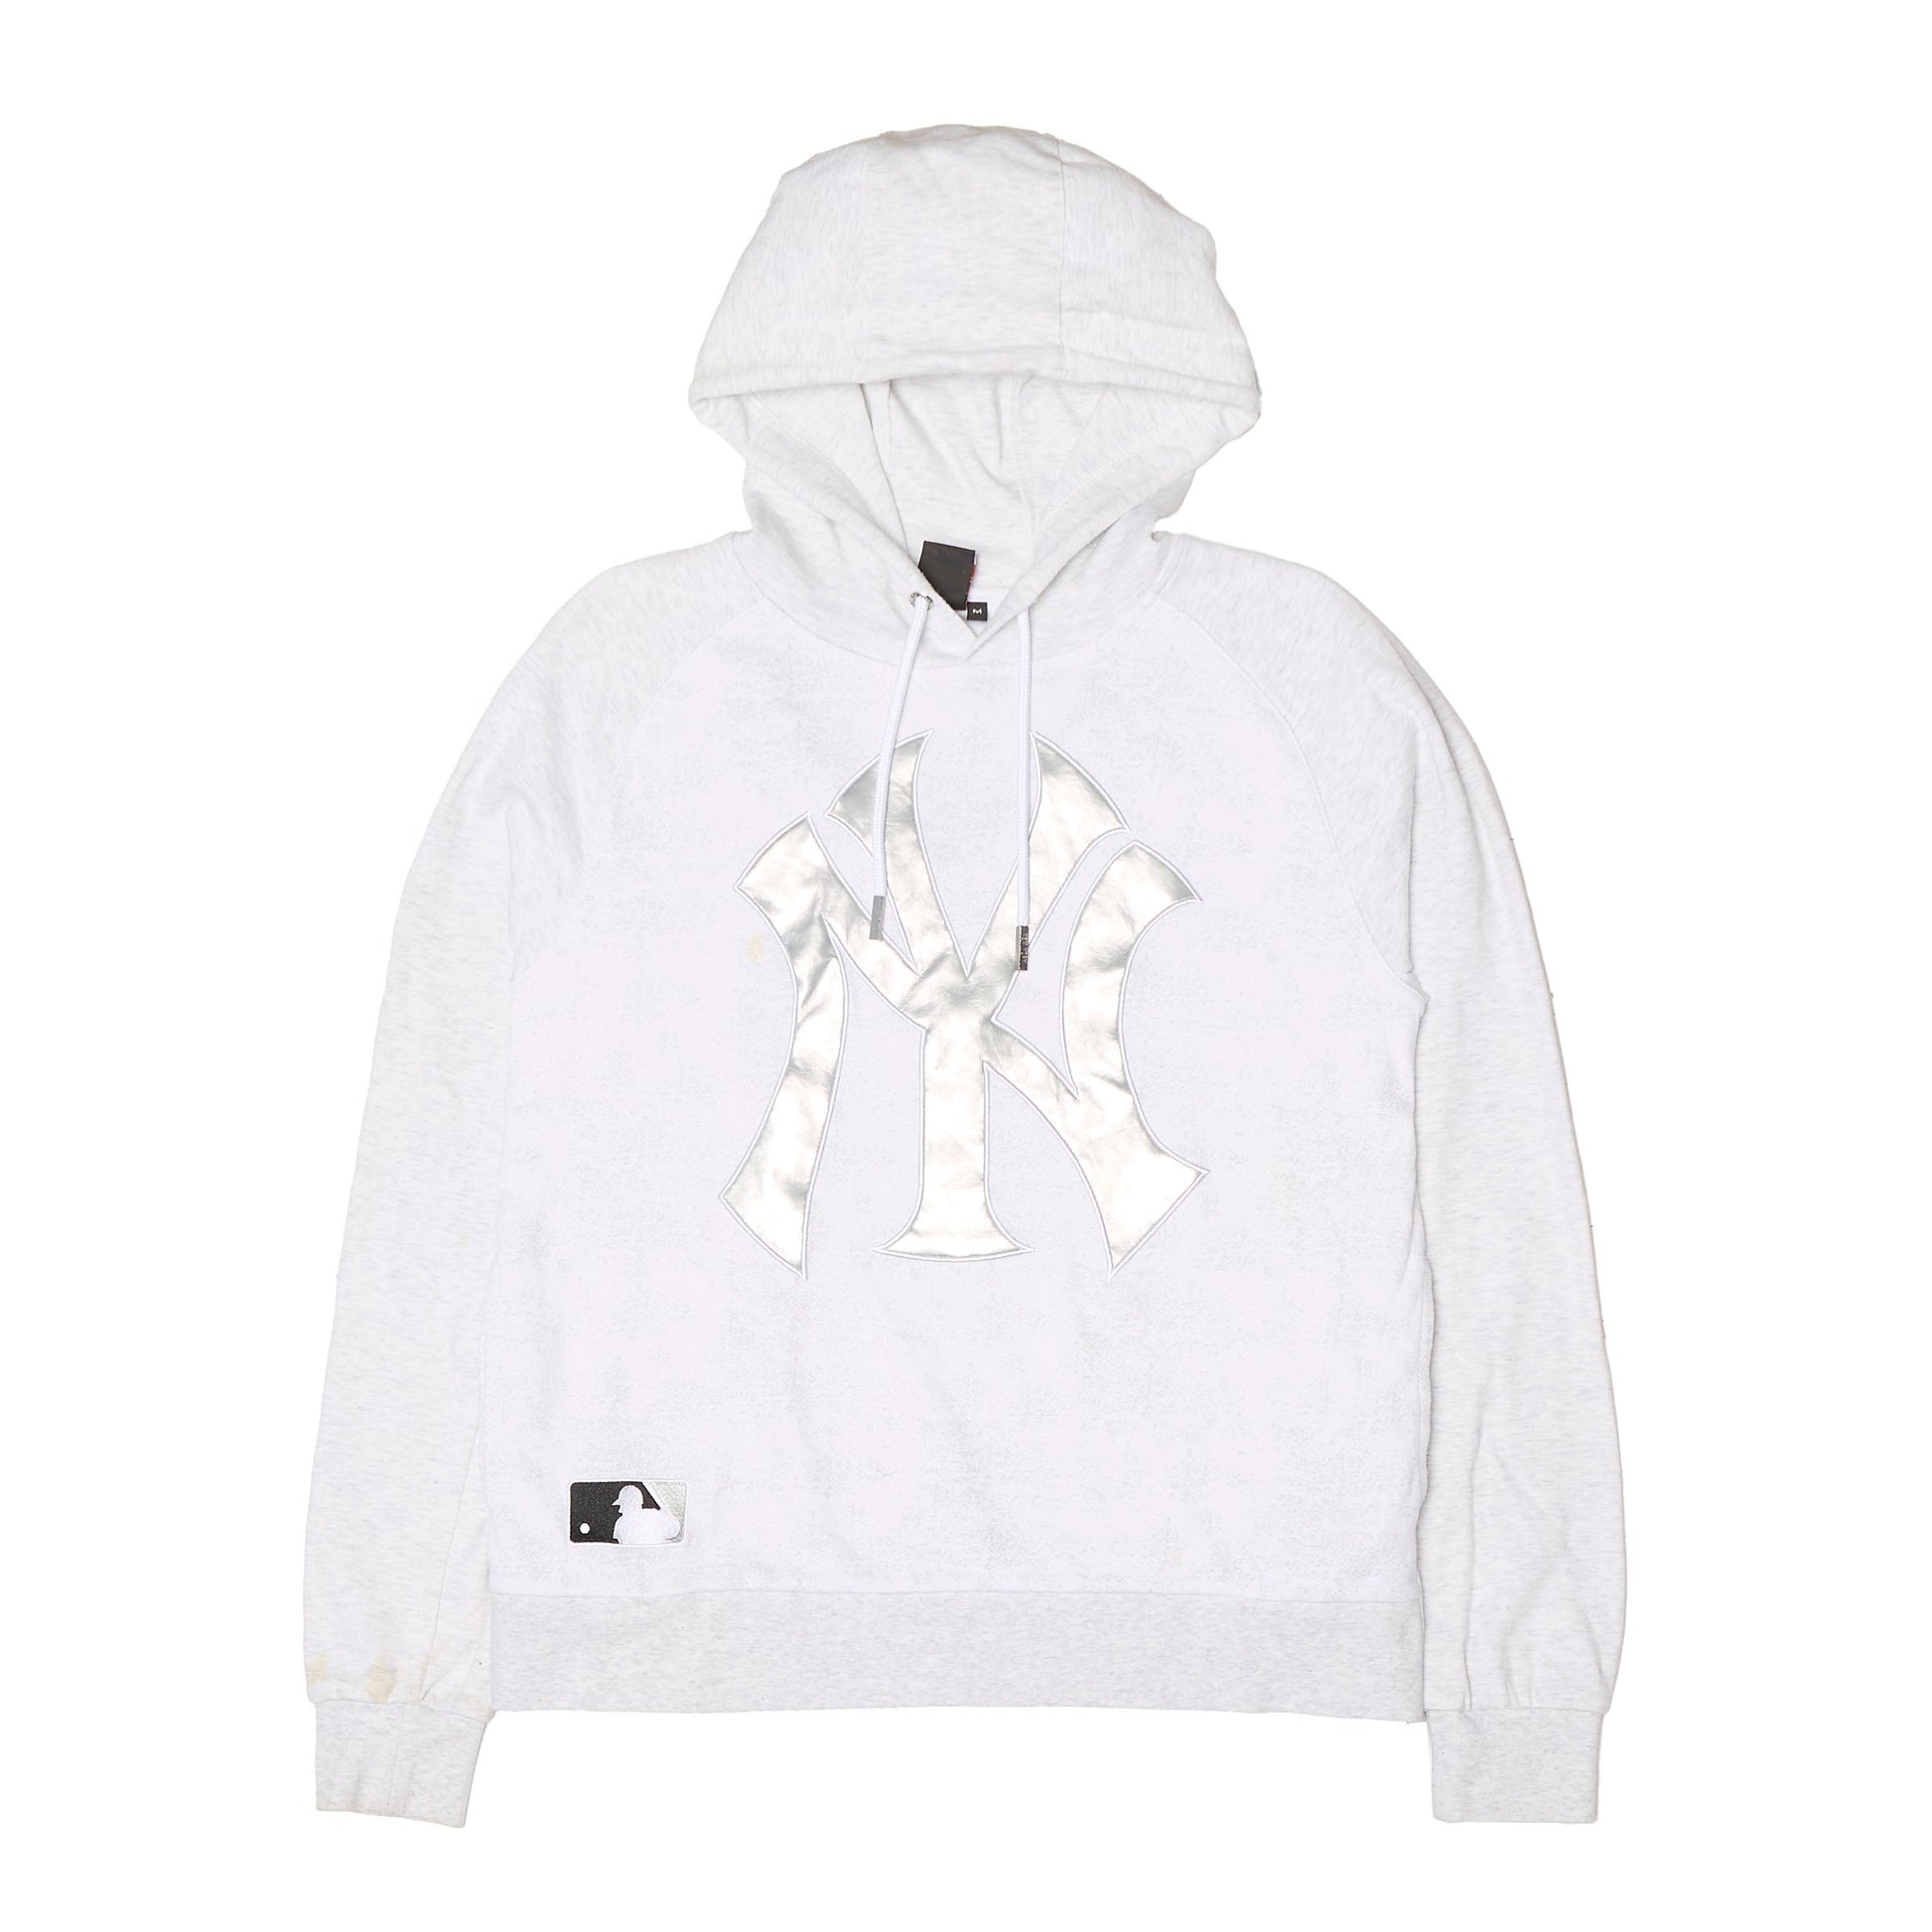 Majestic Athletic NY Embroided Hoodie - M